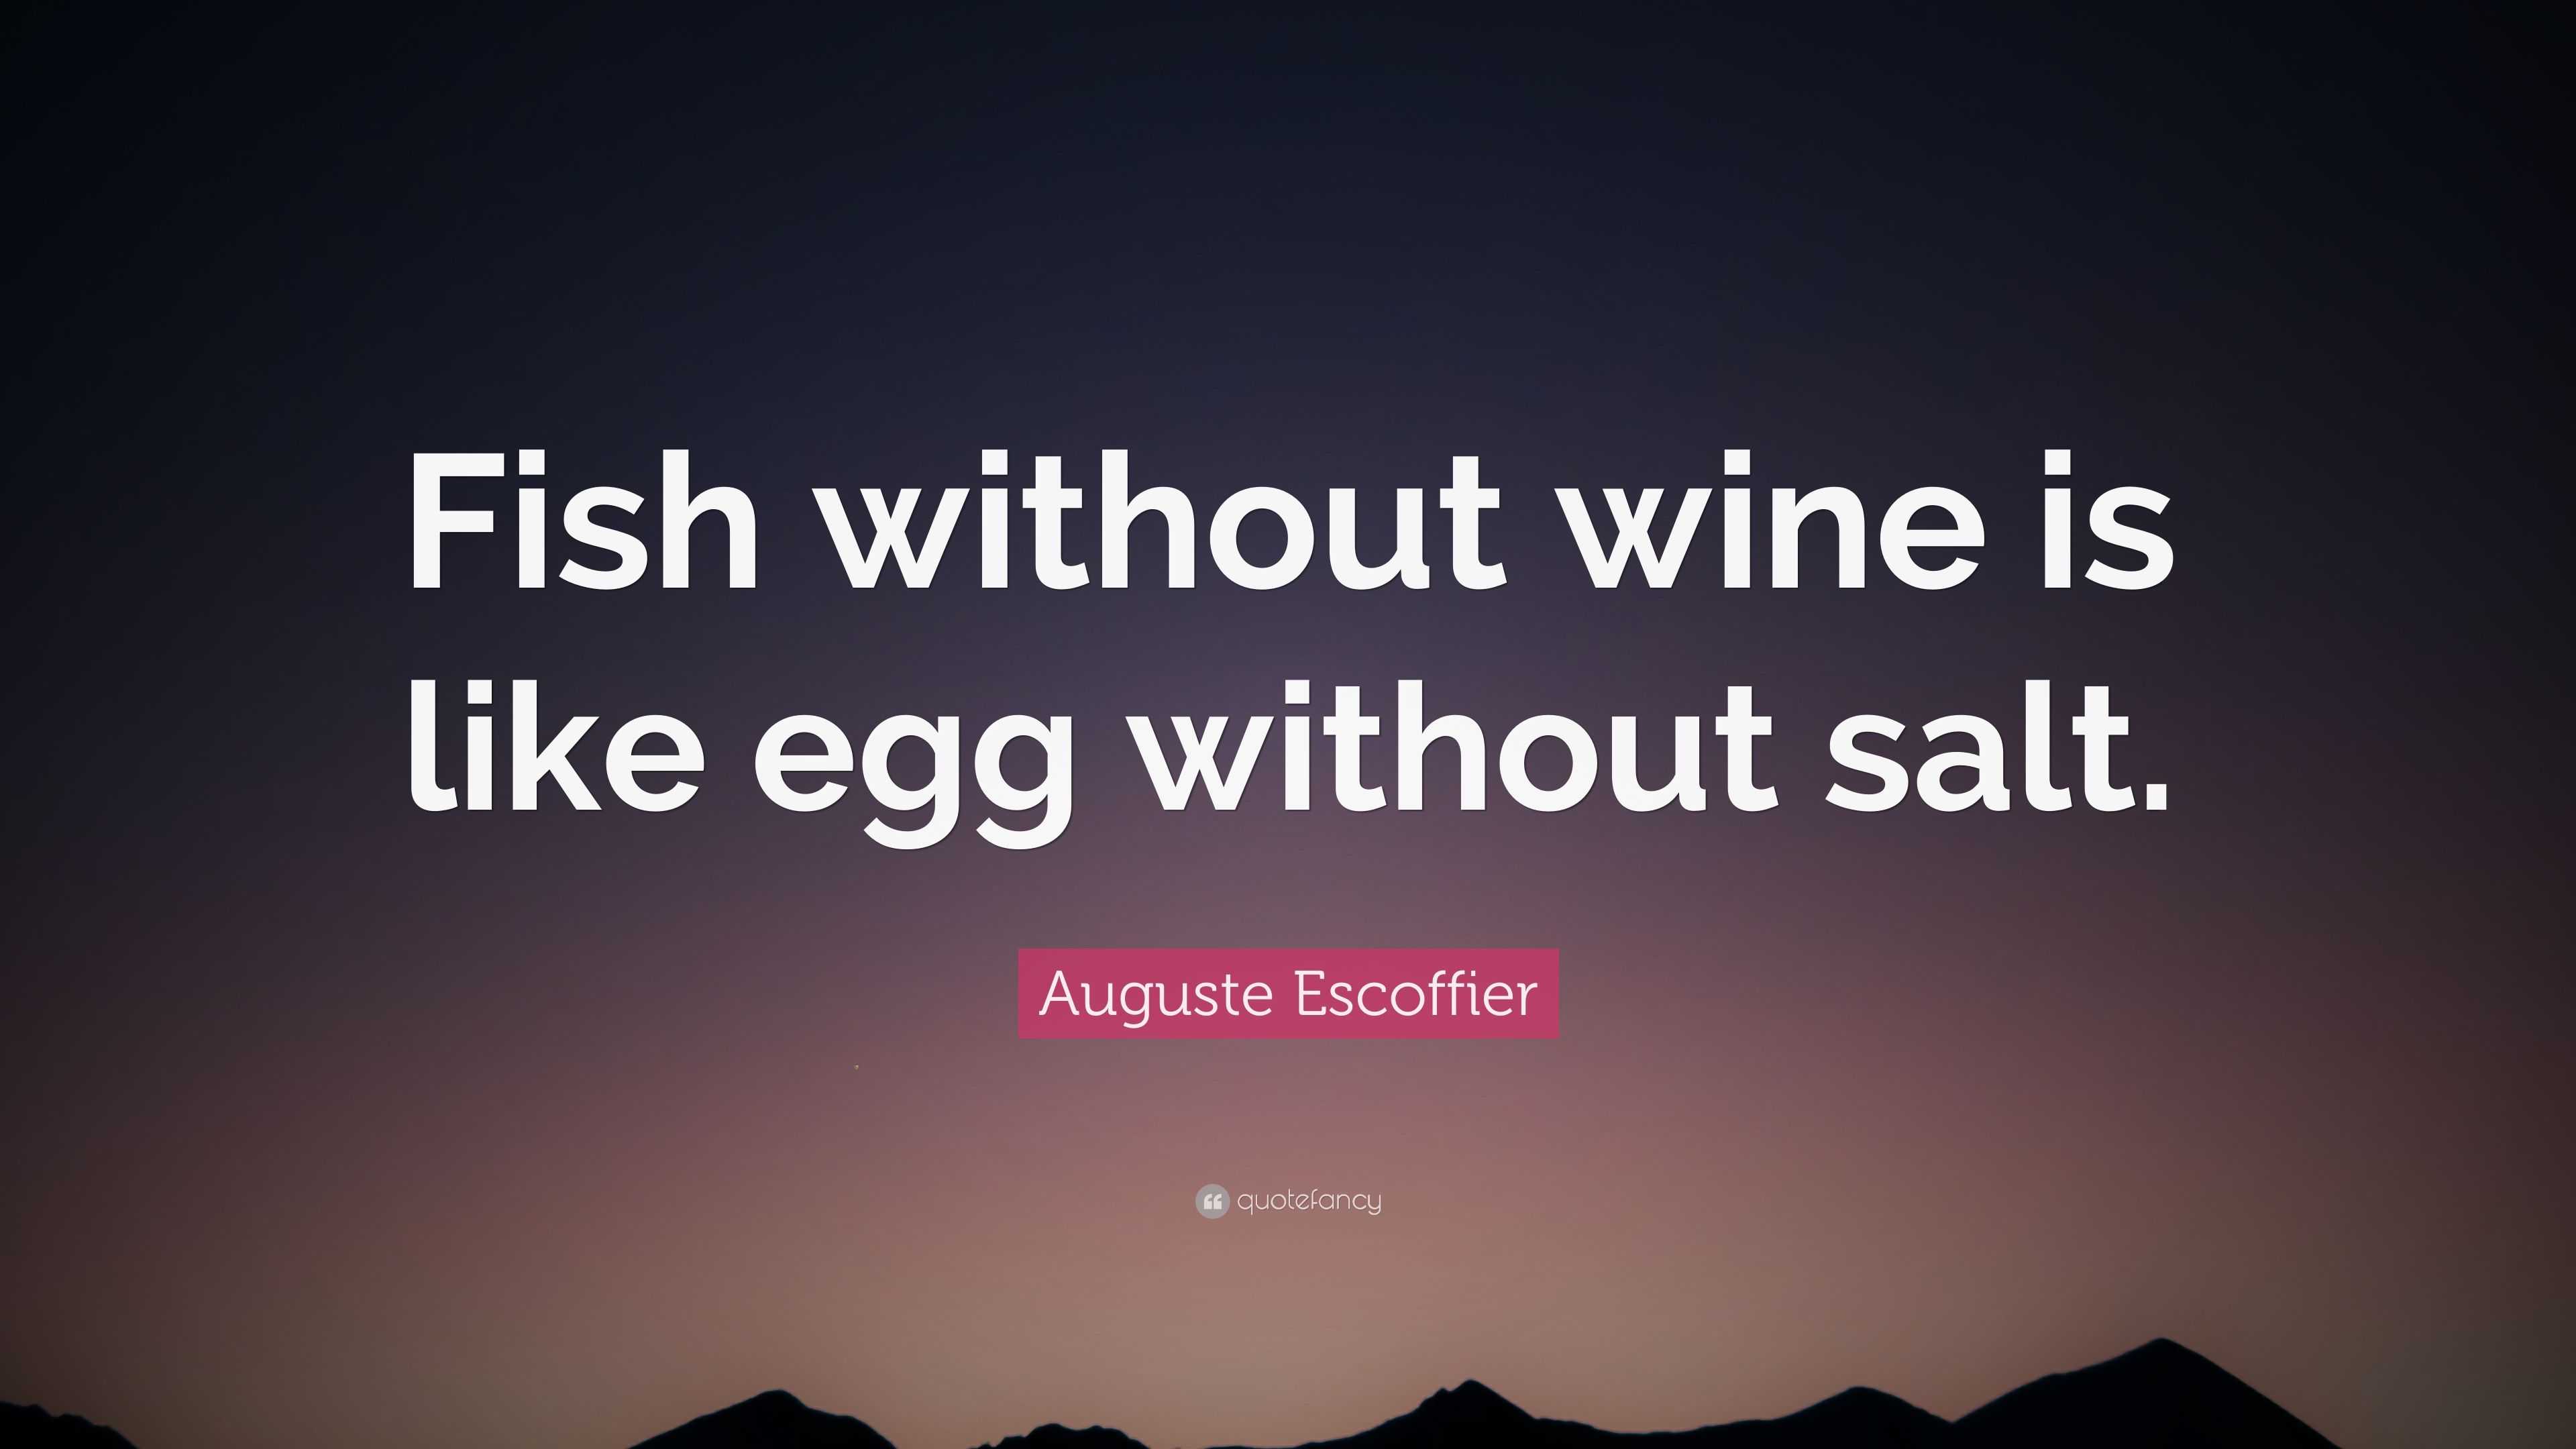 Auguste Escoffier Quote: "Fish without wine is like egg ...